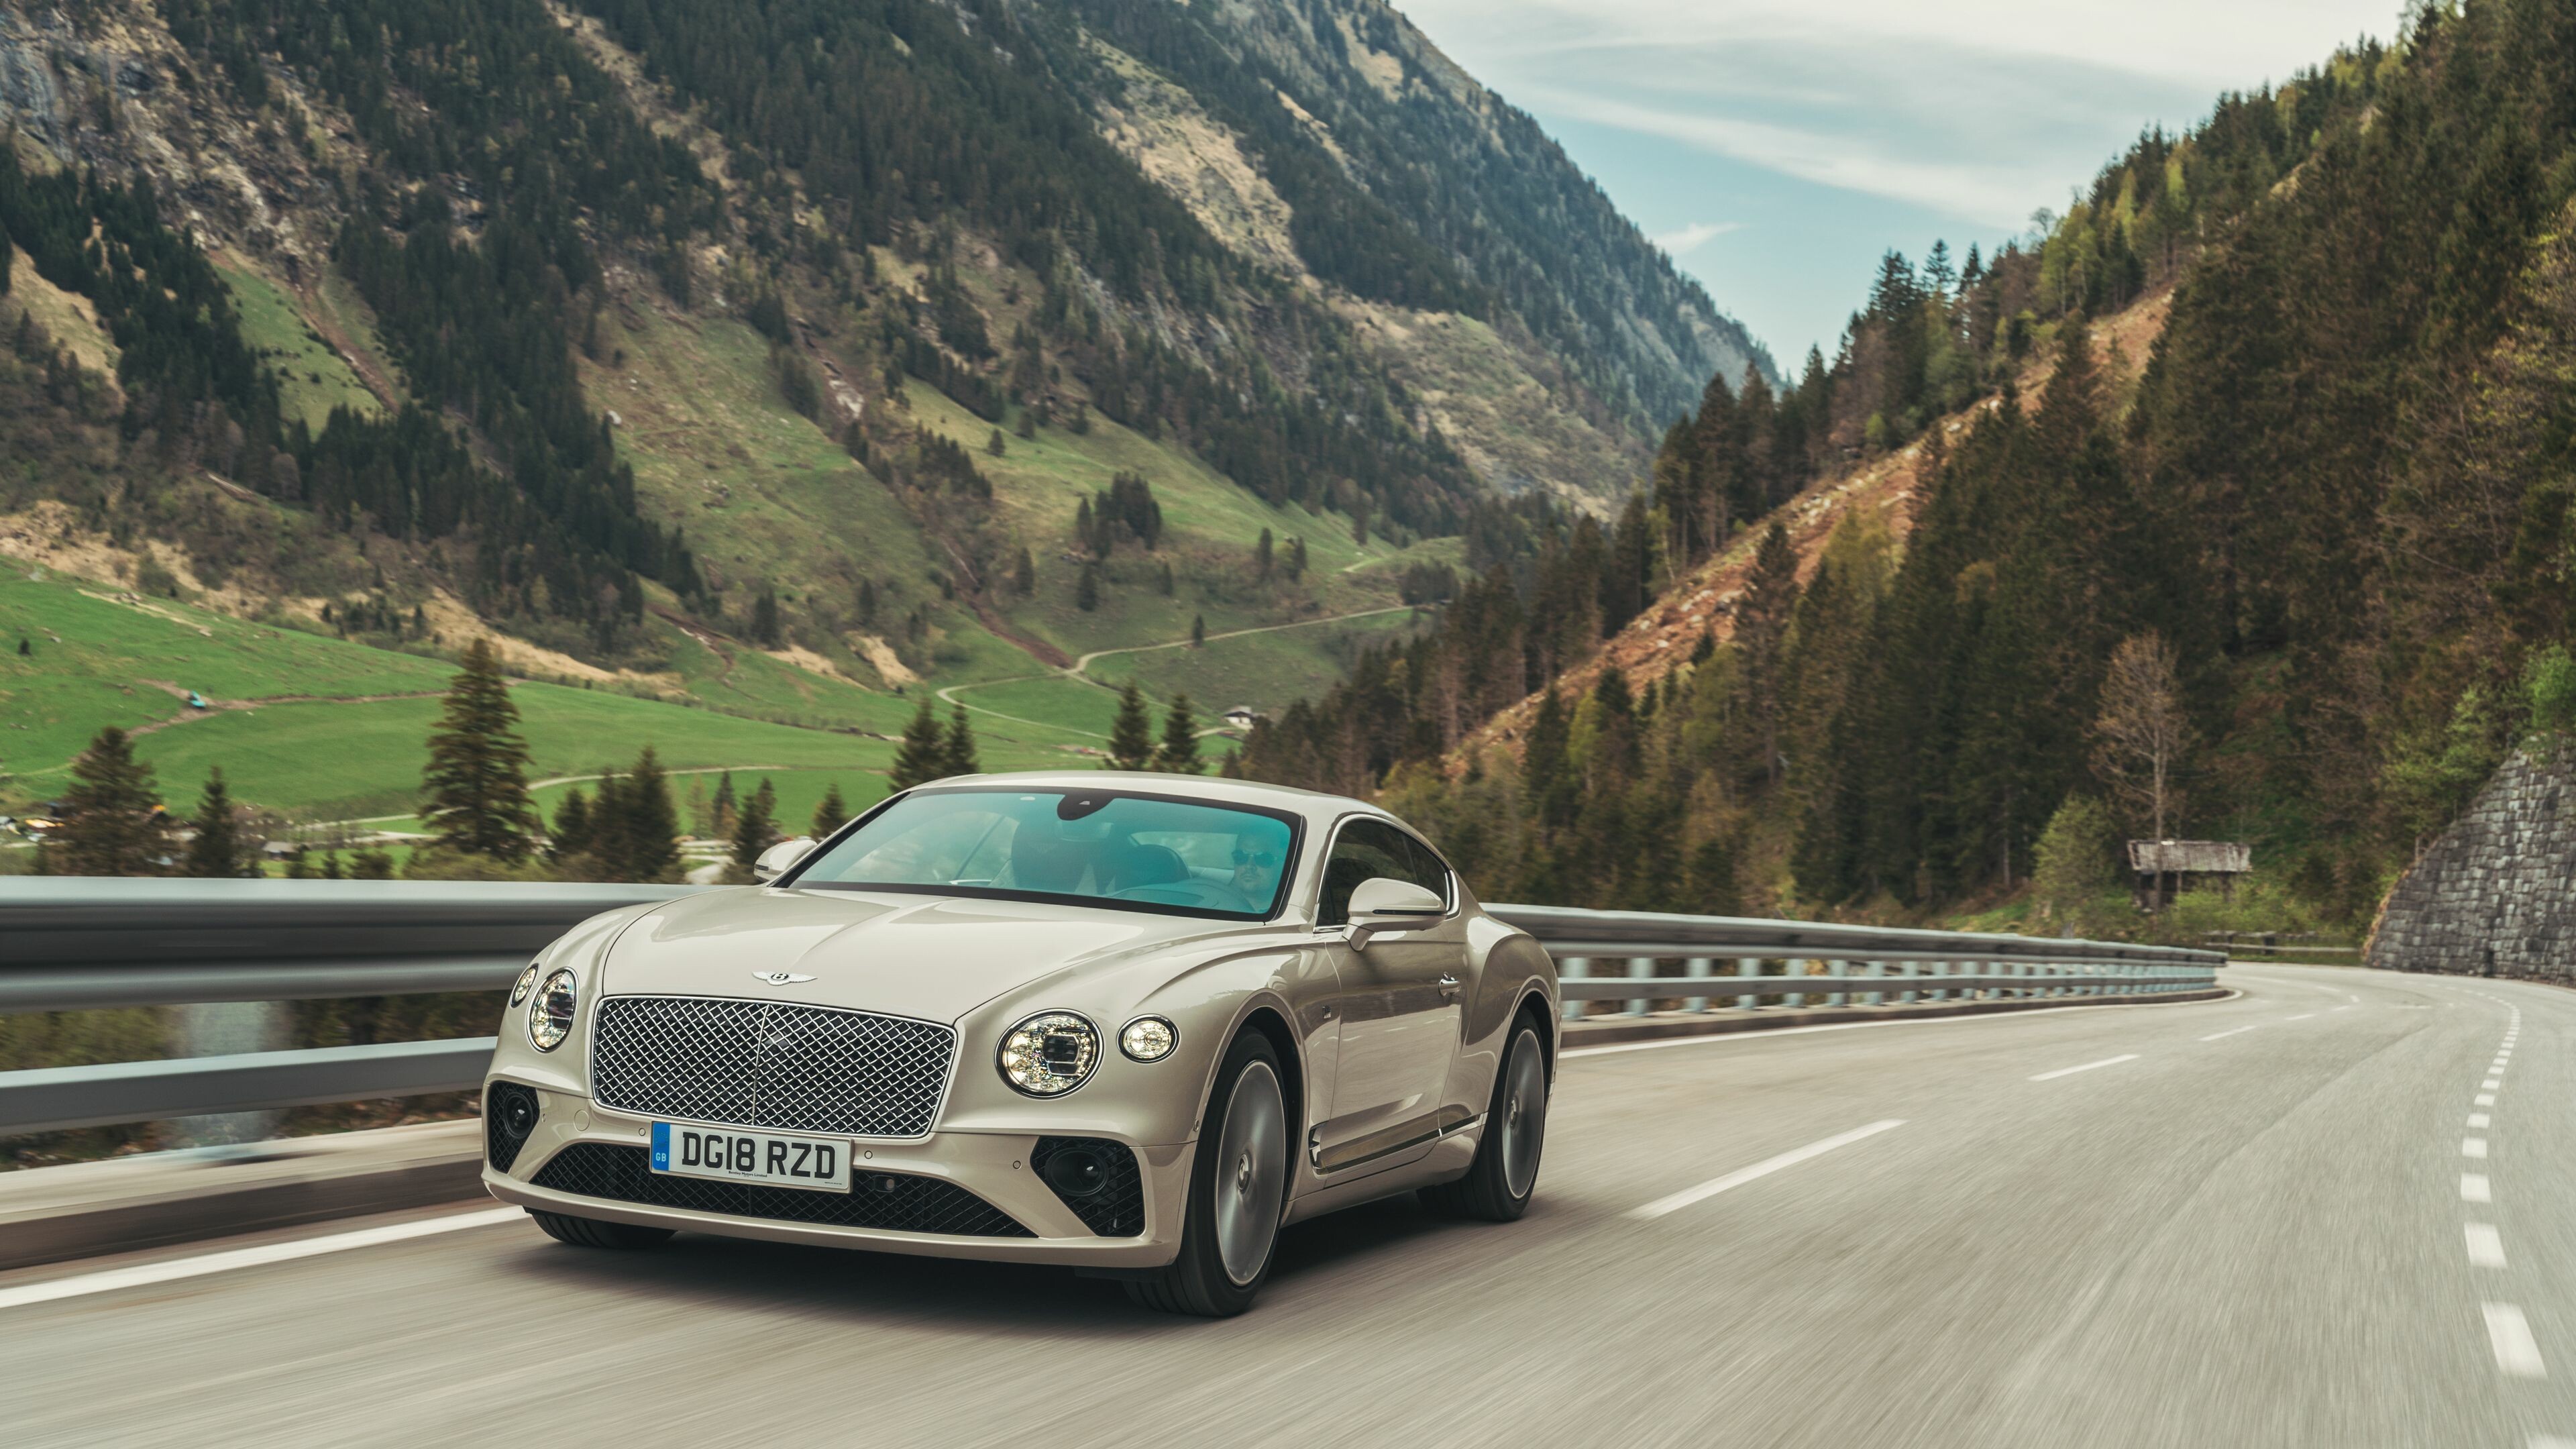 Bentley: The automaker offers a compelling blend of old-world British charm mixed with modern luxury tech and performance courtesy of its owner, the Volkswagen Group. 3840x2160 4K Wallpaper.